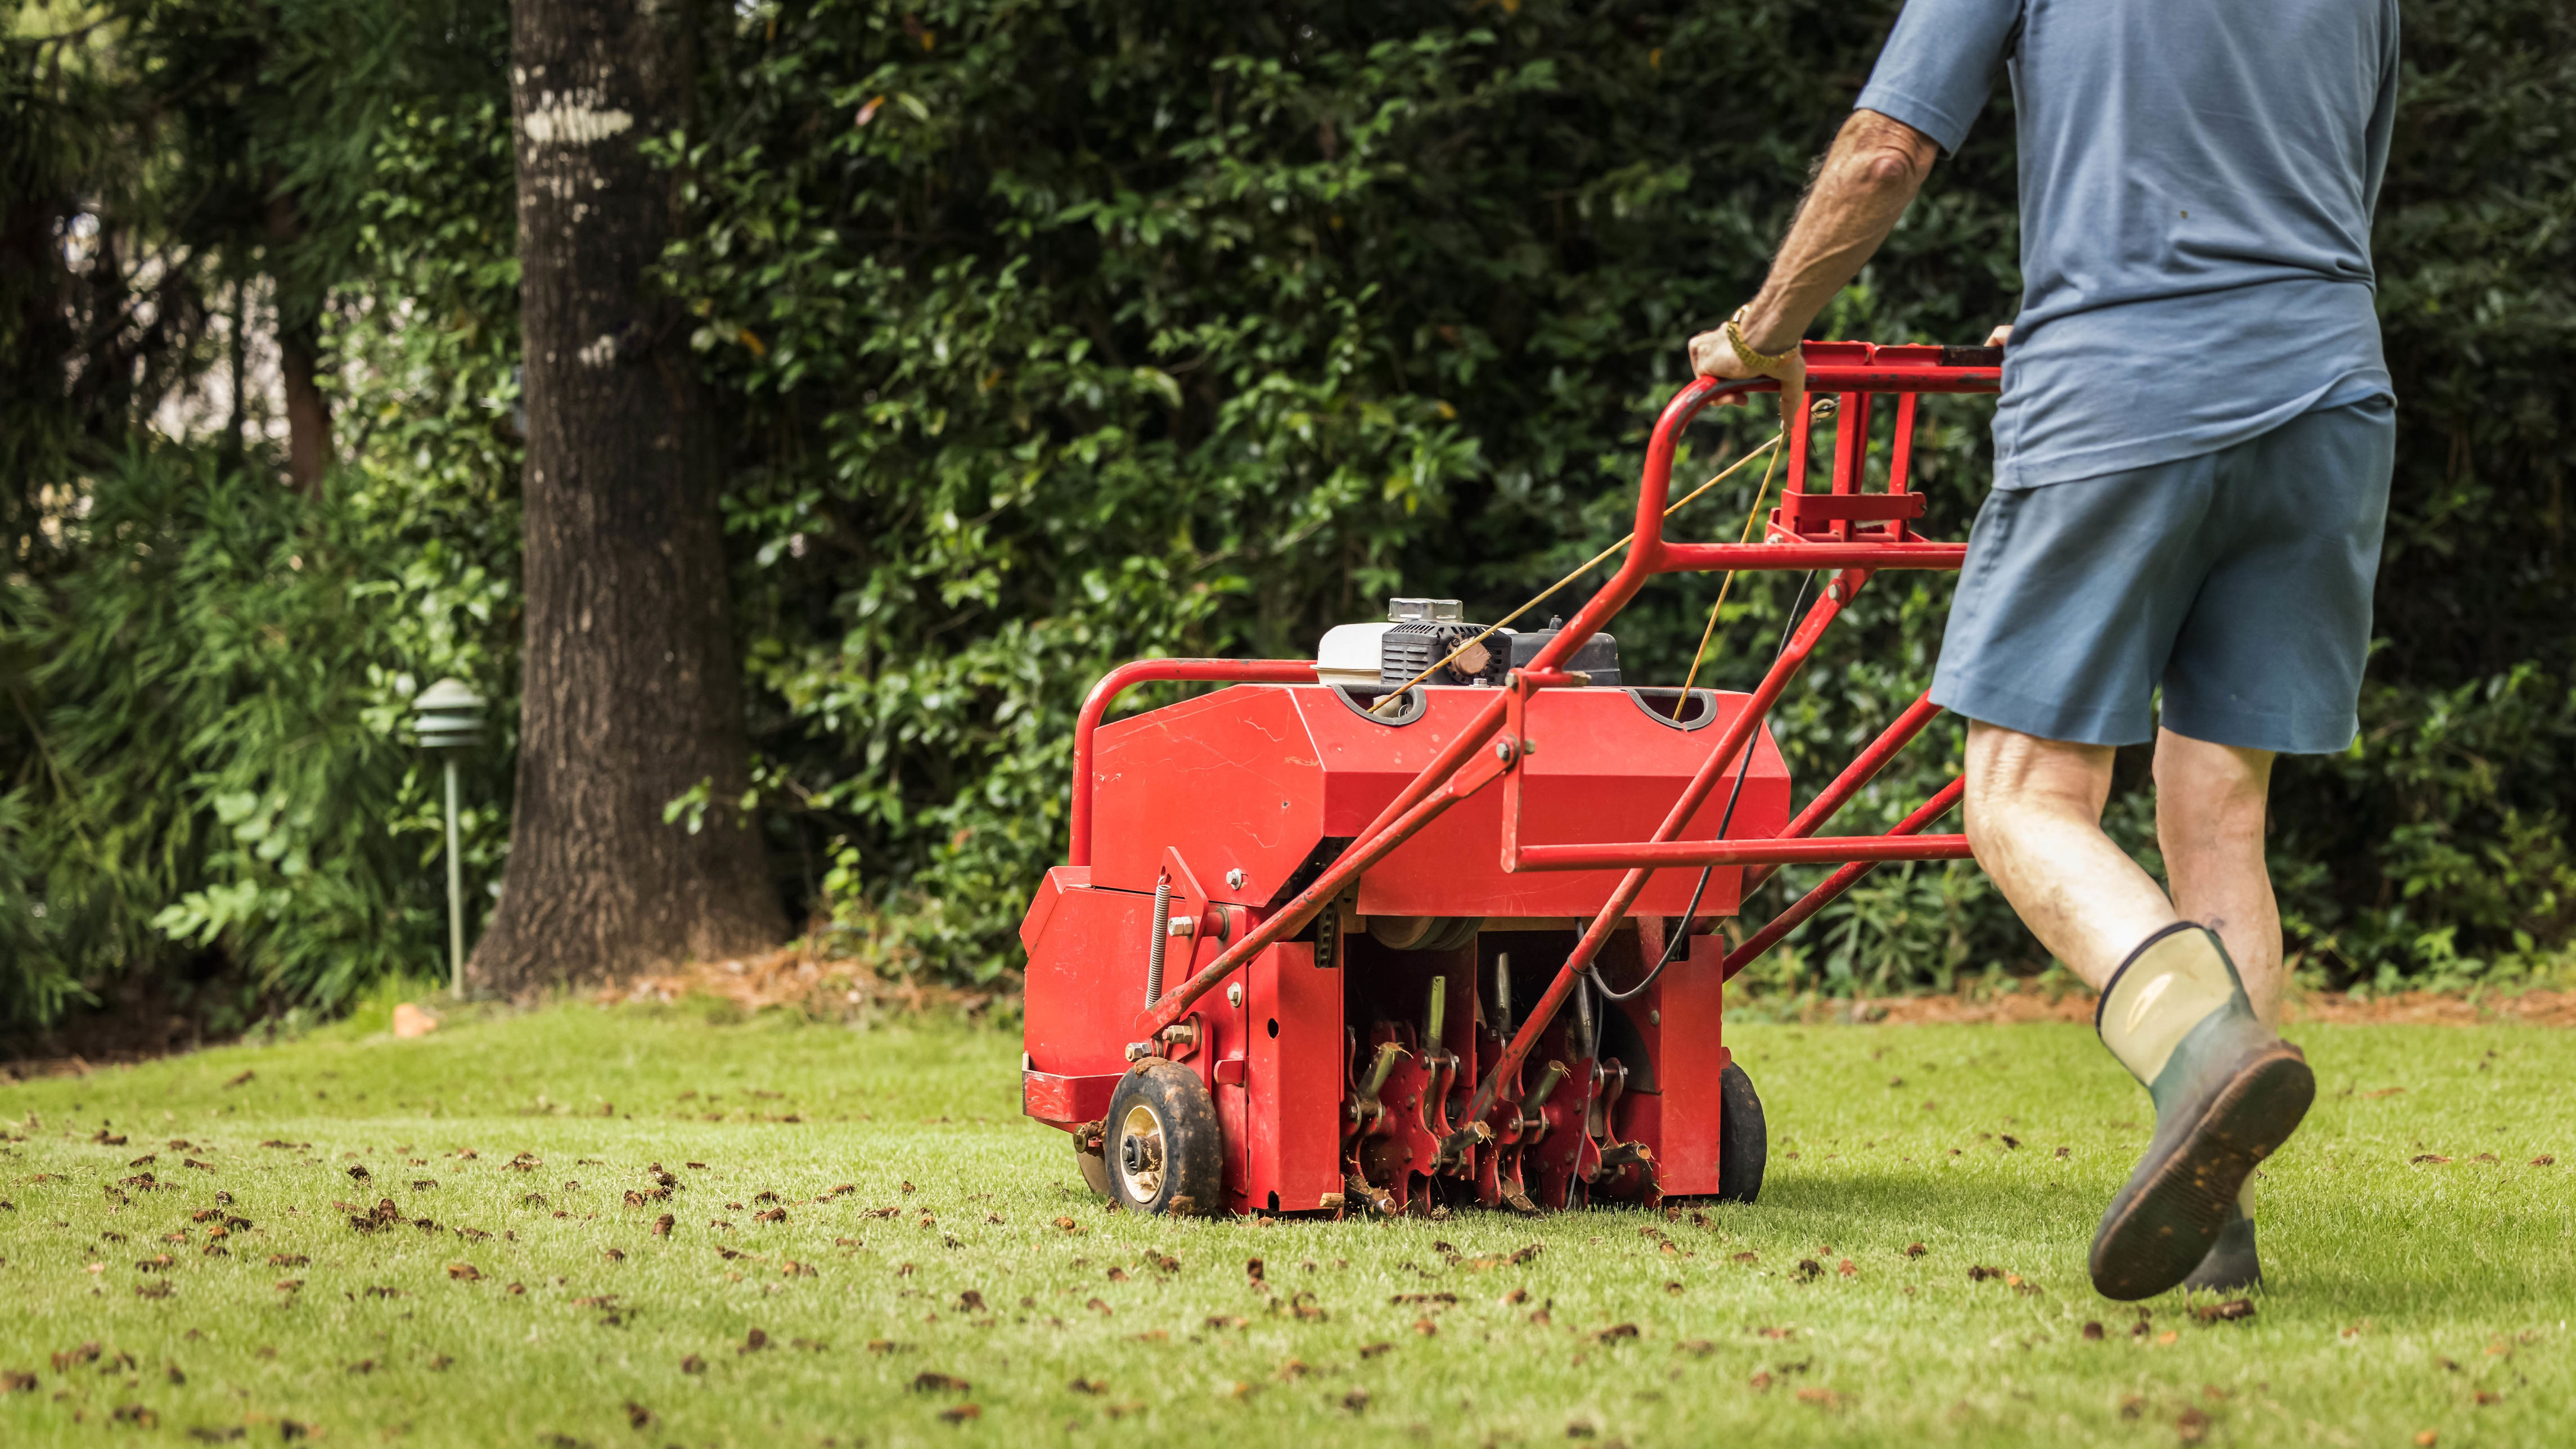 amazon, 5 lawn care tasks to do in may, according to a garden expert